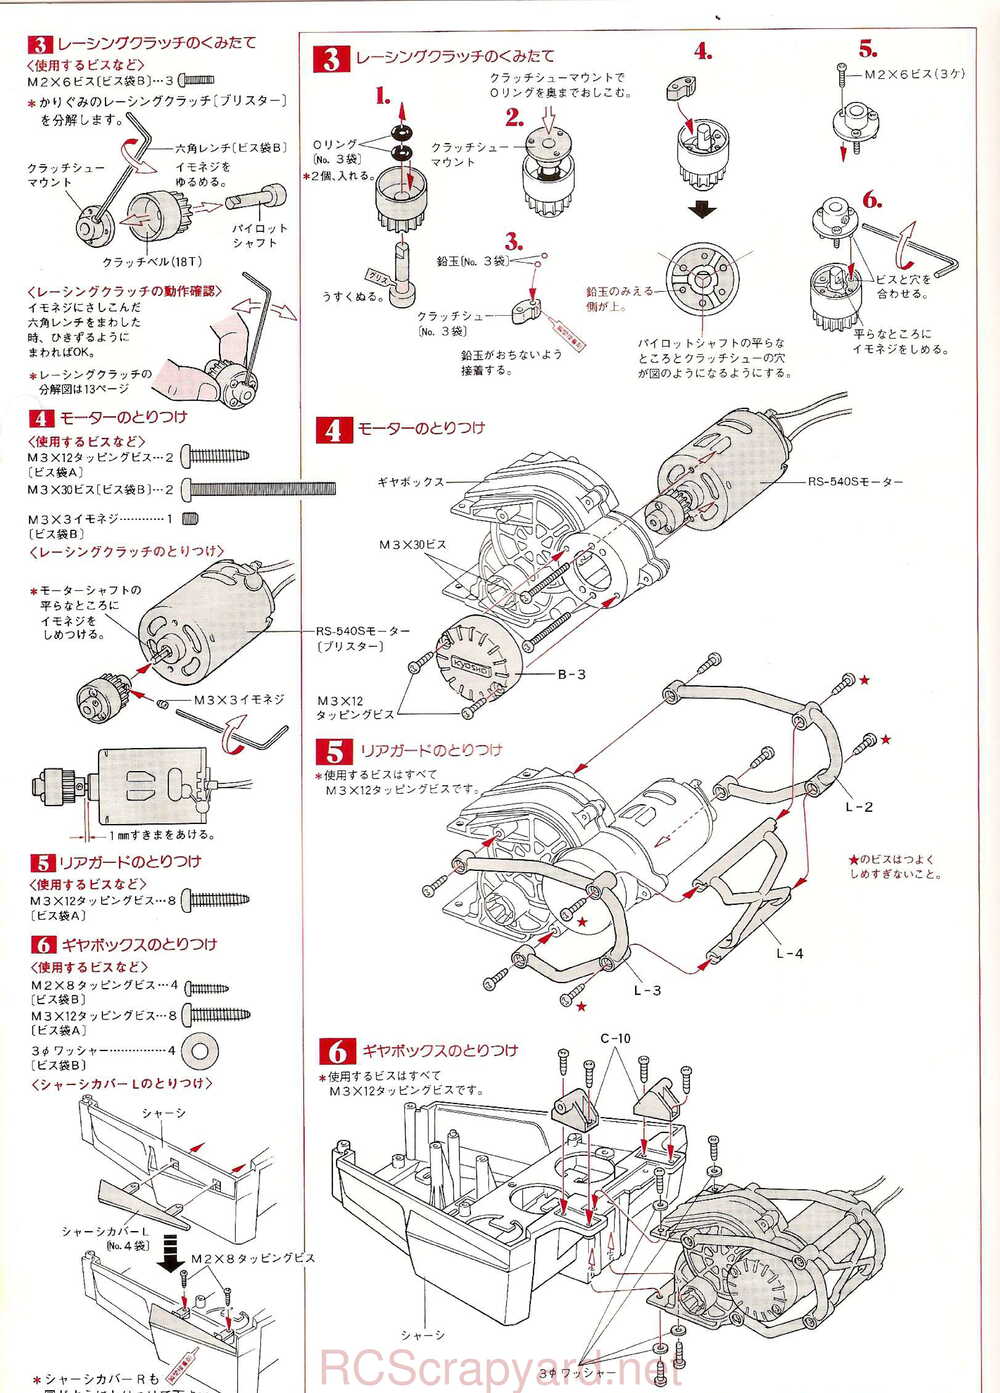 Kyosho - 3084 - Cosmo - Manual - Page 04